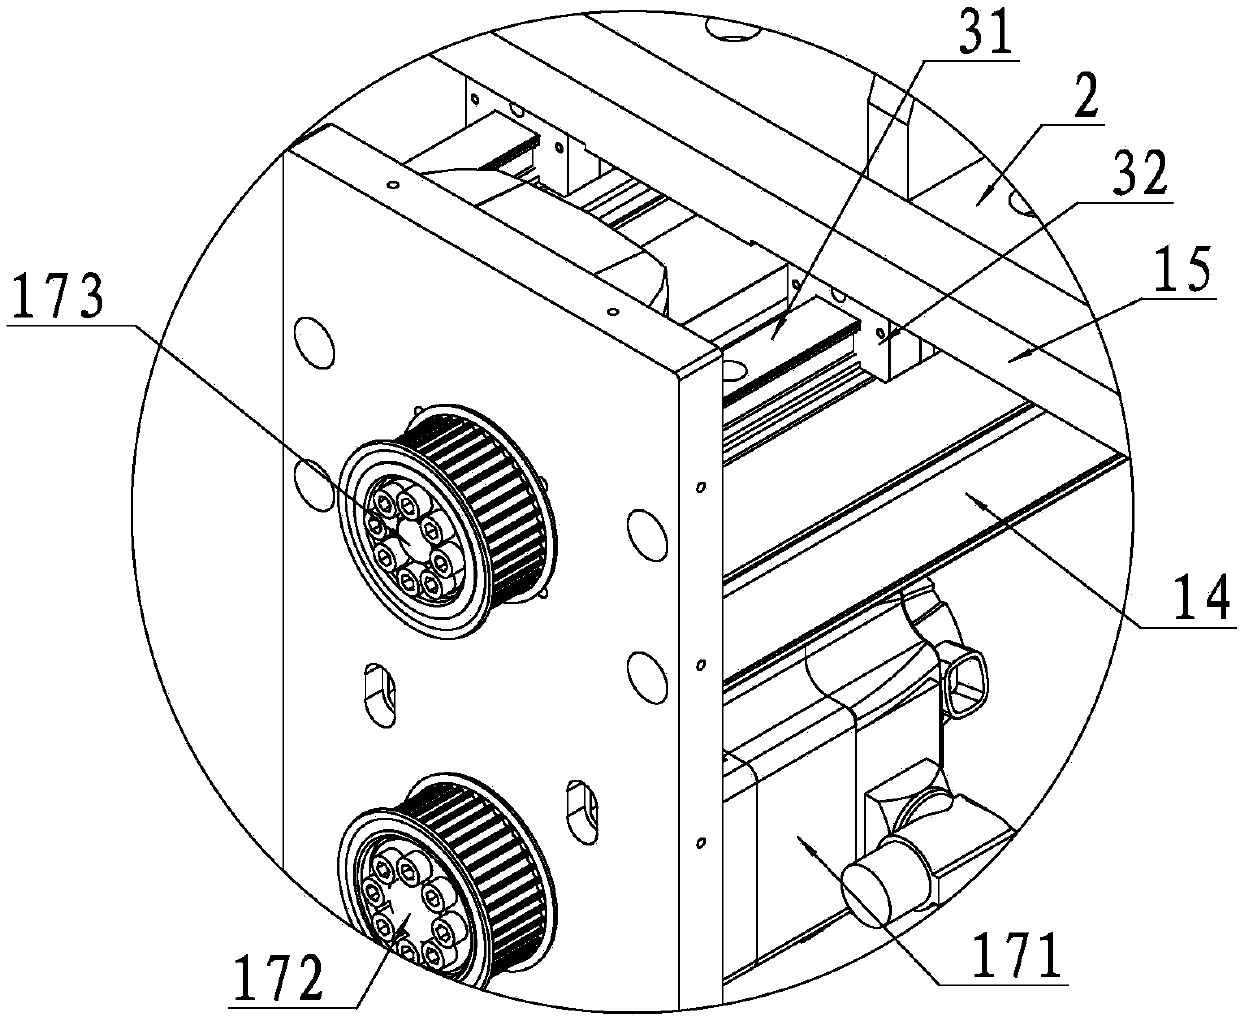 Automatic loading device applied to brake pad production